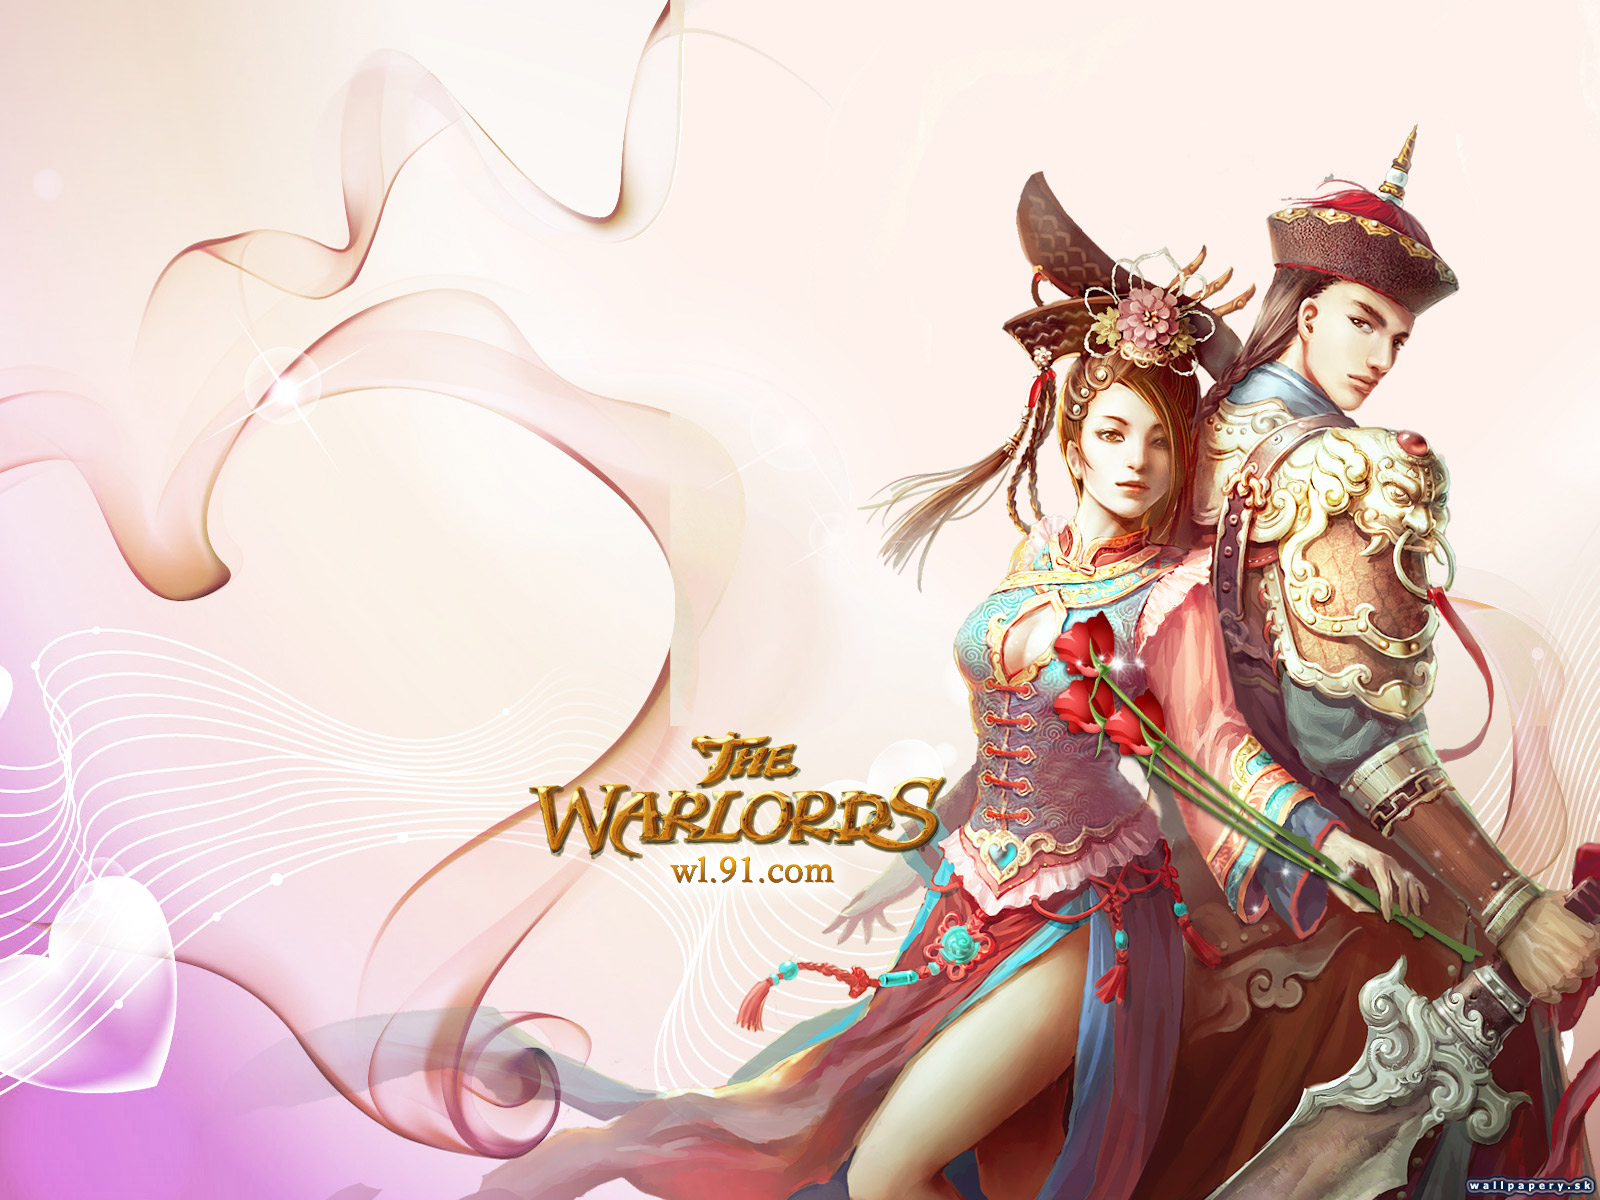 The Warlords - wallpaper 2